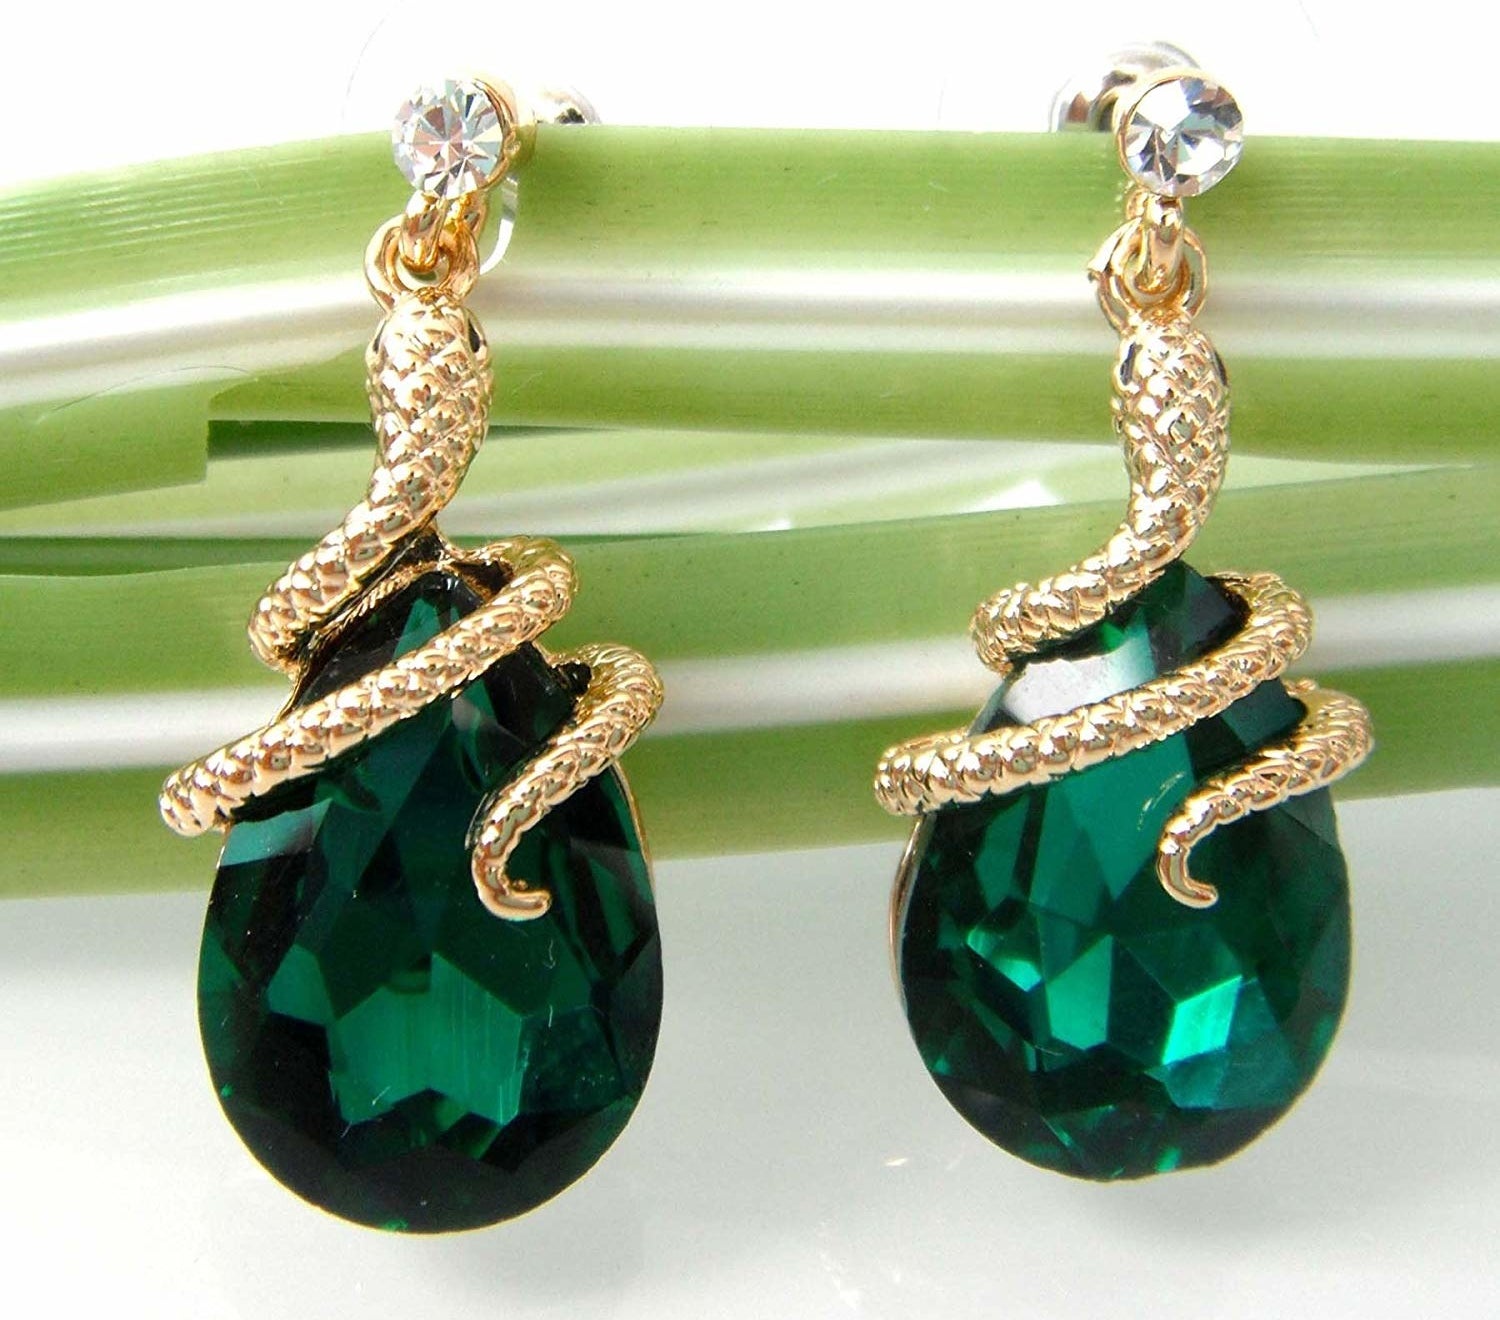 The dangle earrings with teardrop green stones and snakes wrapped around the top